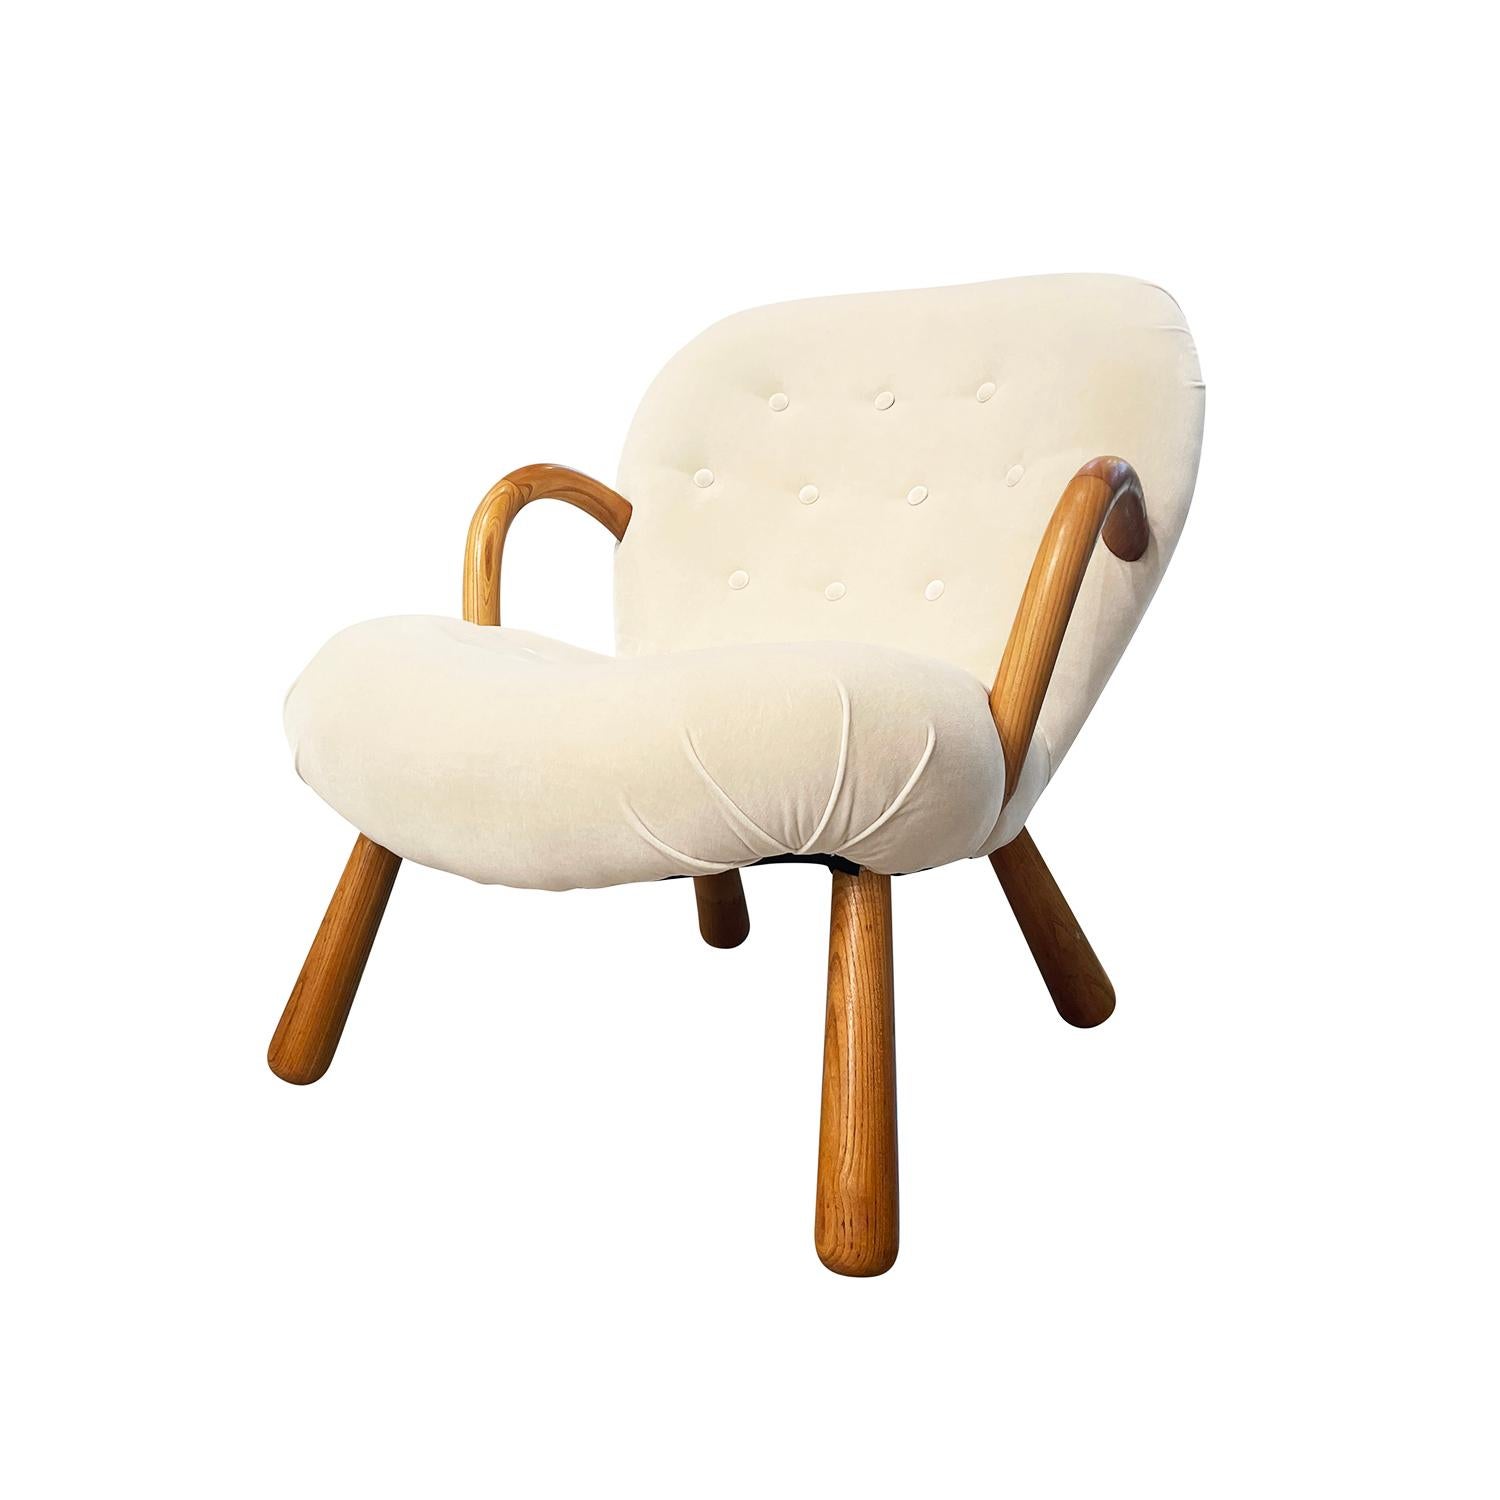 20th Century Danish Vintage Beech Clam Chair by Arnold Madsen & Schubell In Good Condition For Sale In West Palm Beach, FL